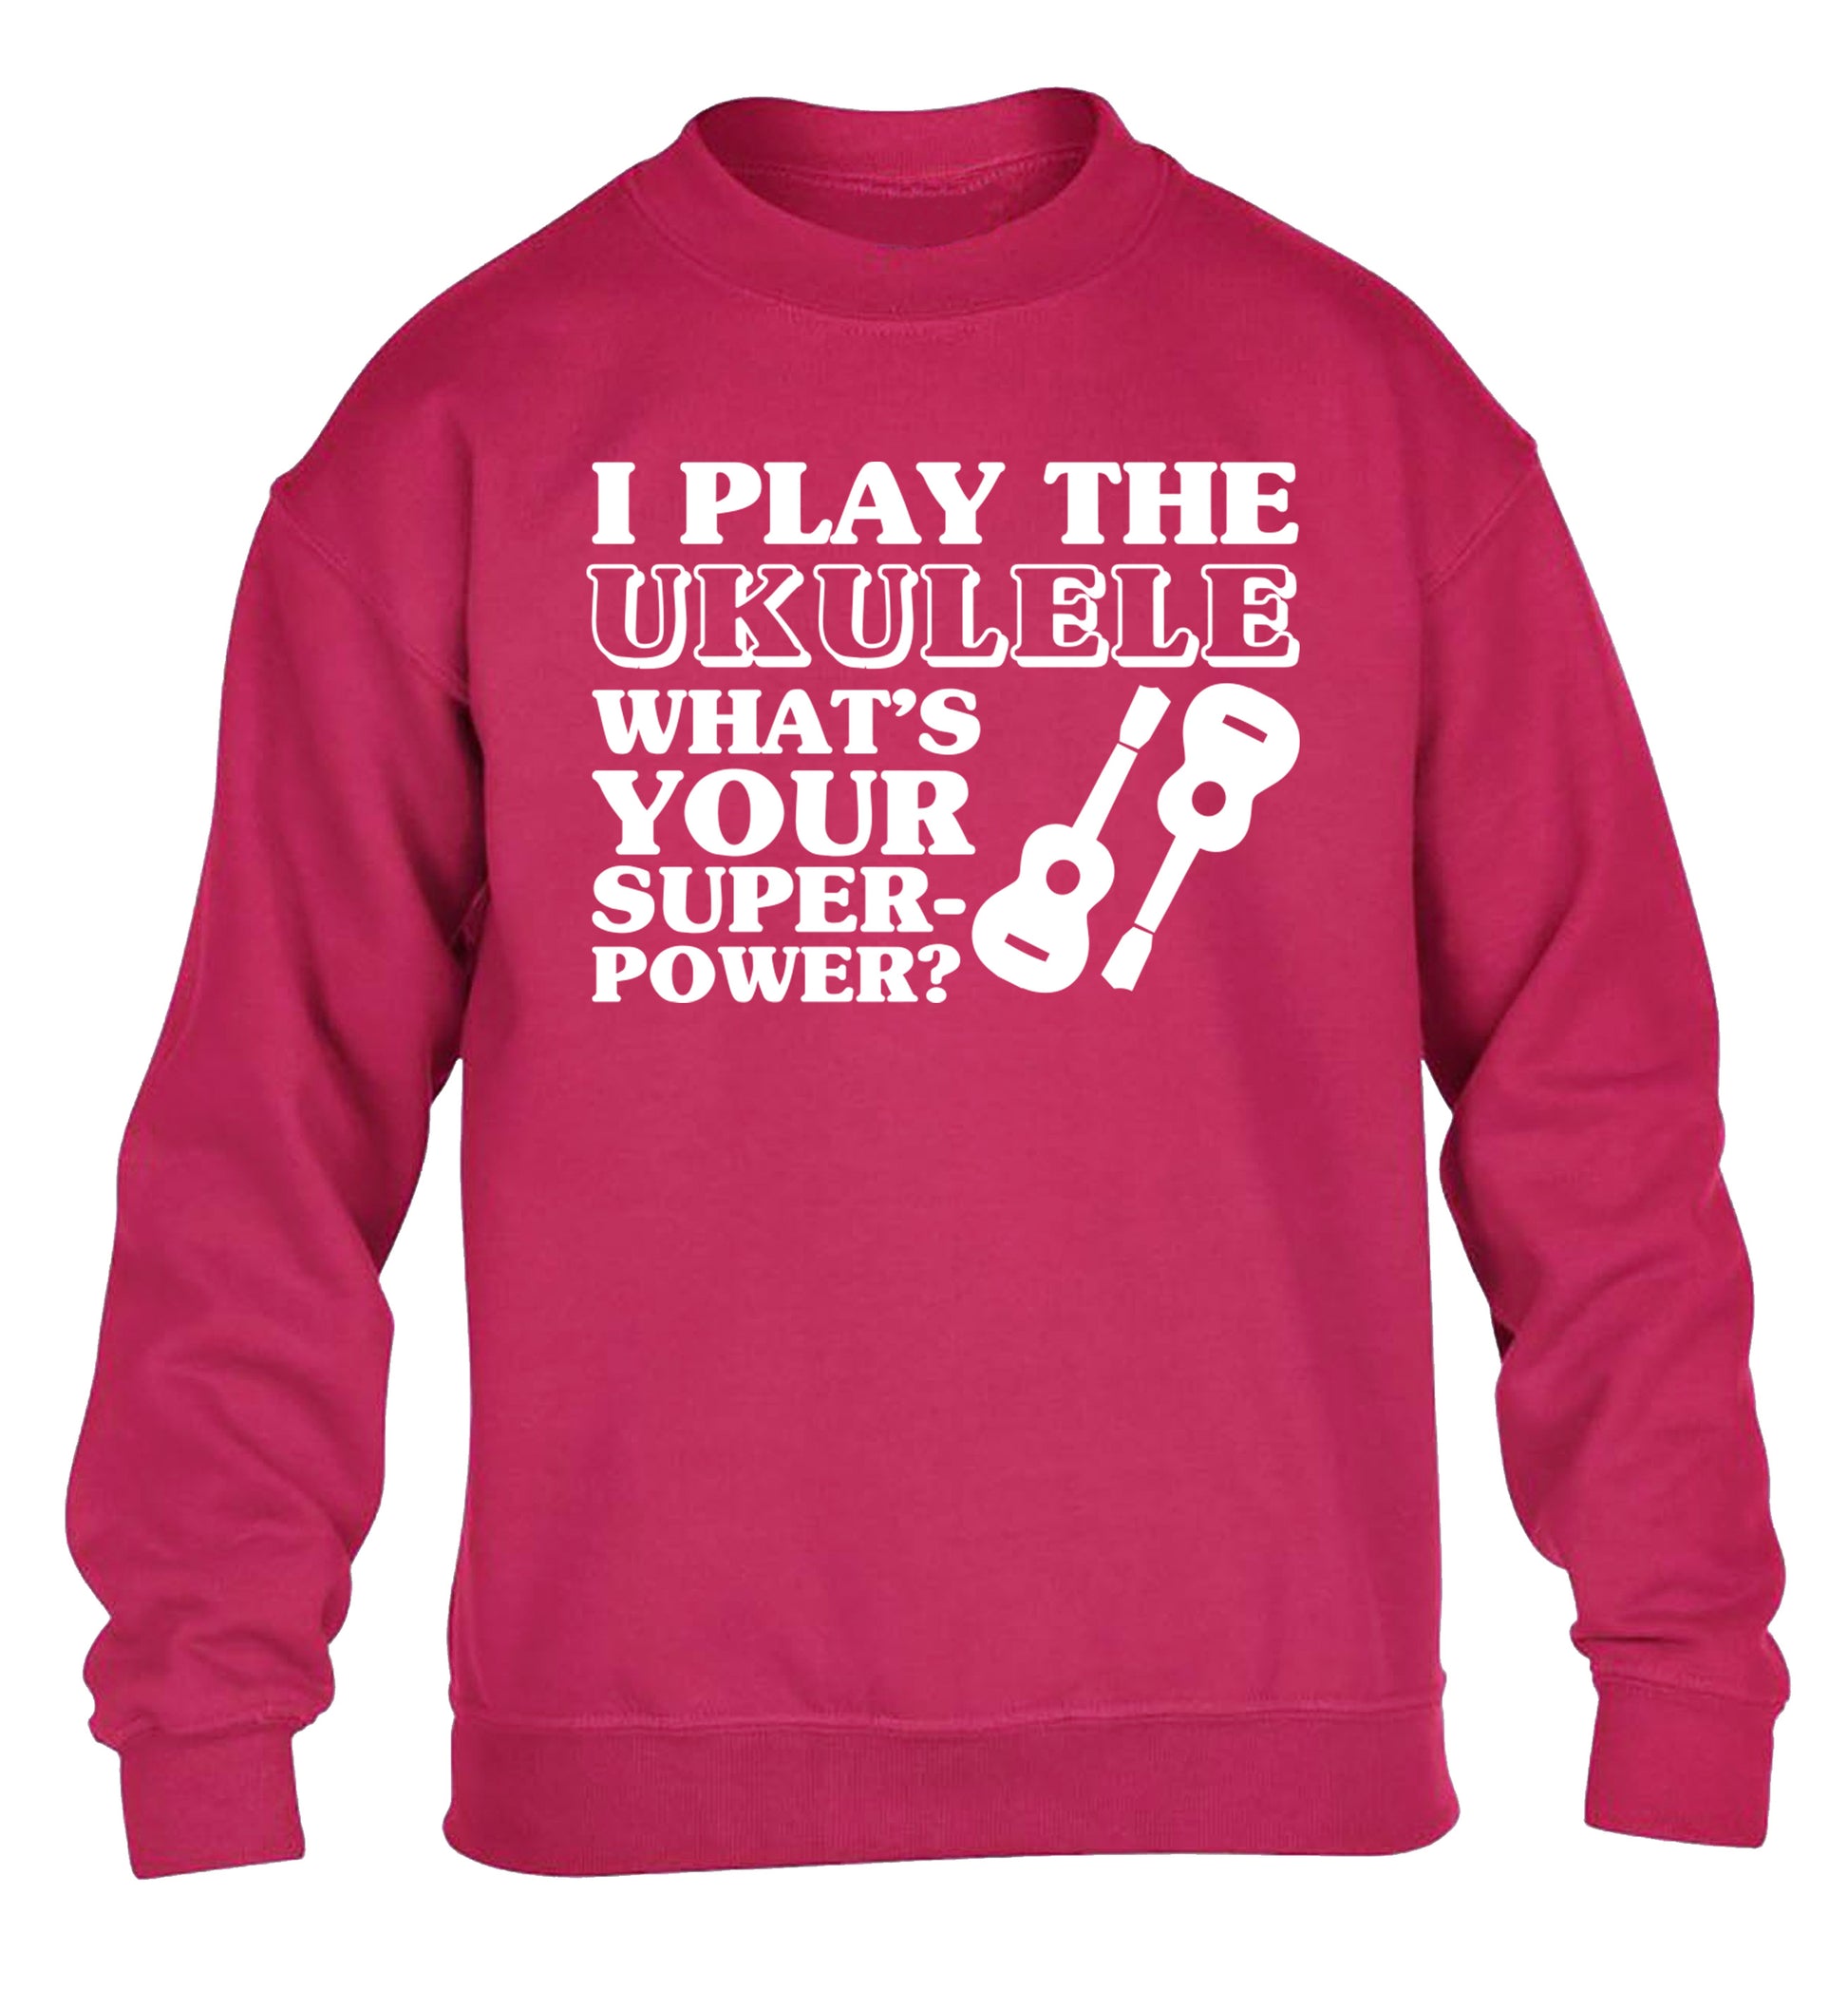 I play the ukulele what's your superpower? children's pink sweater 12-14 Years